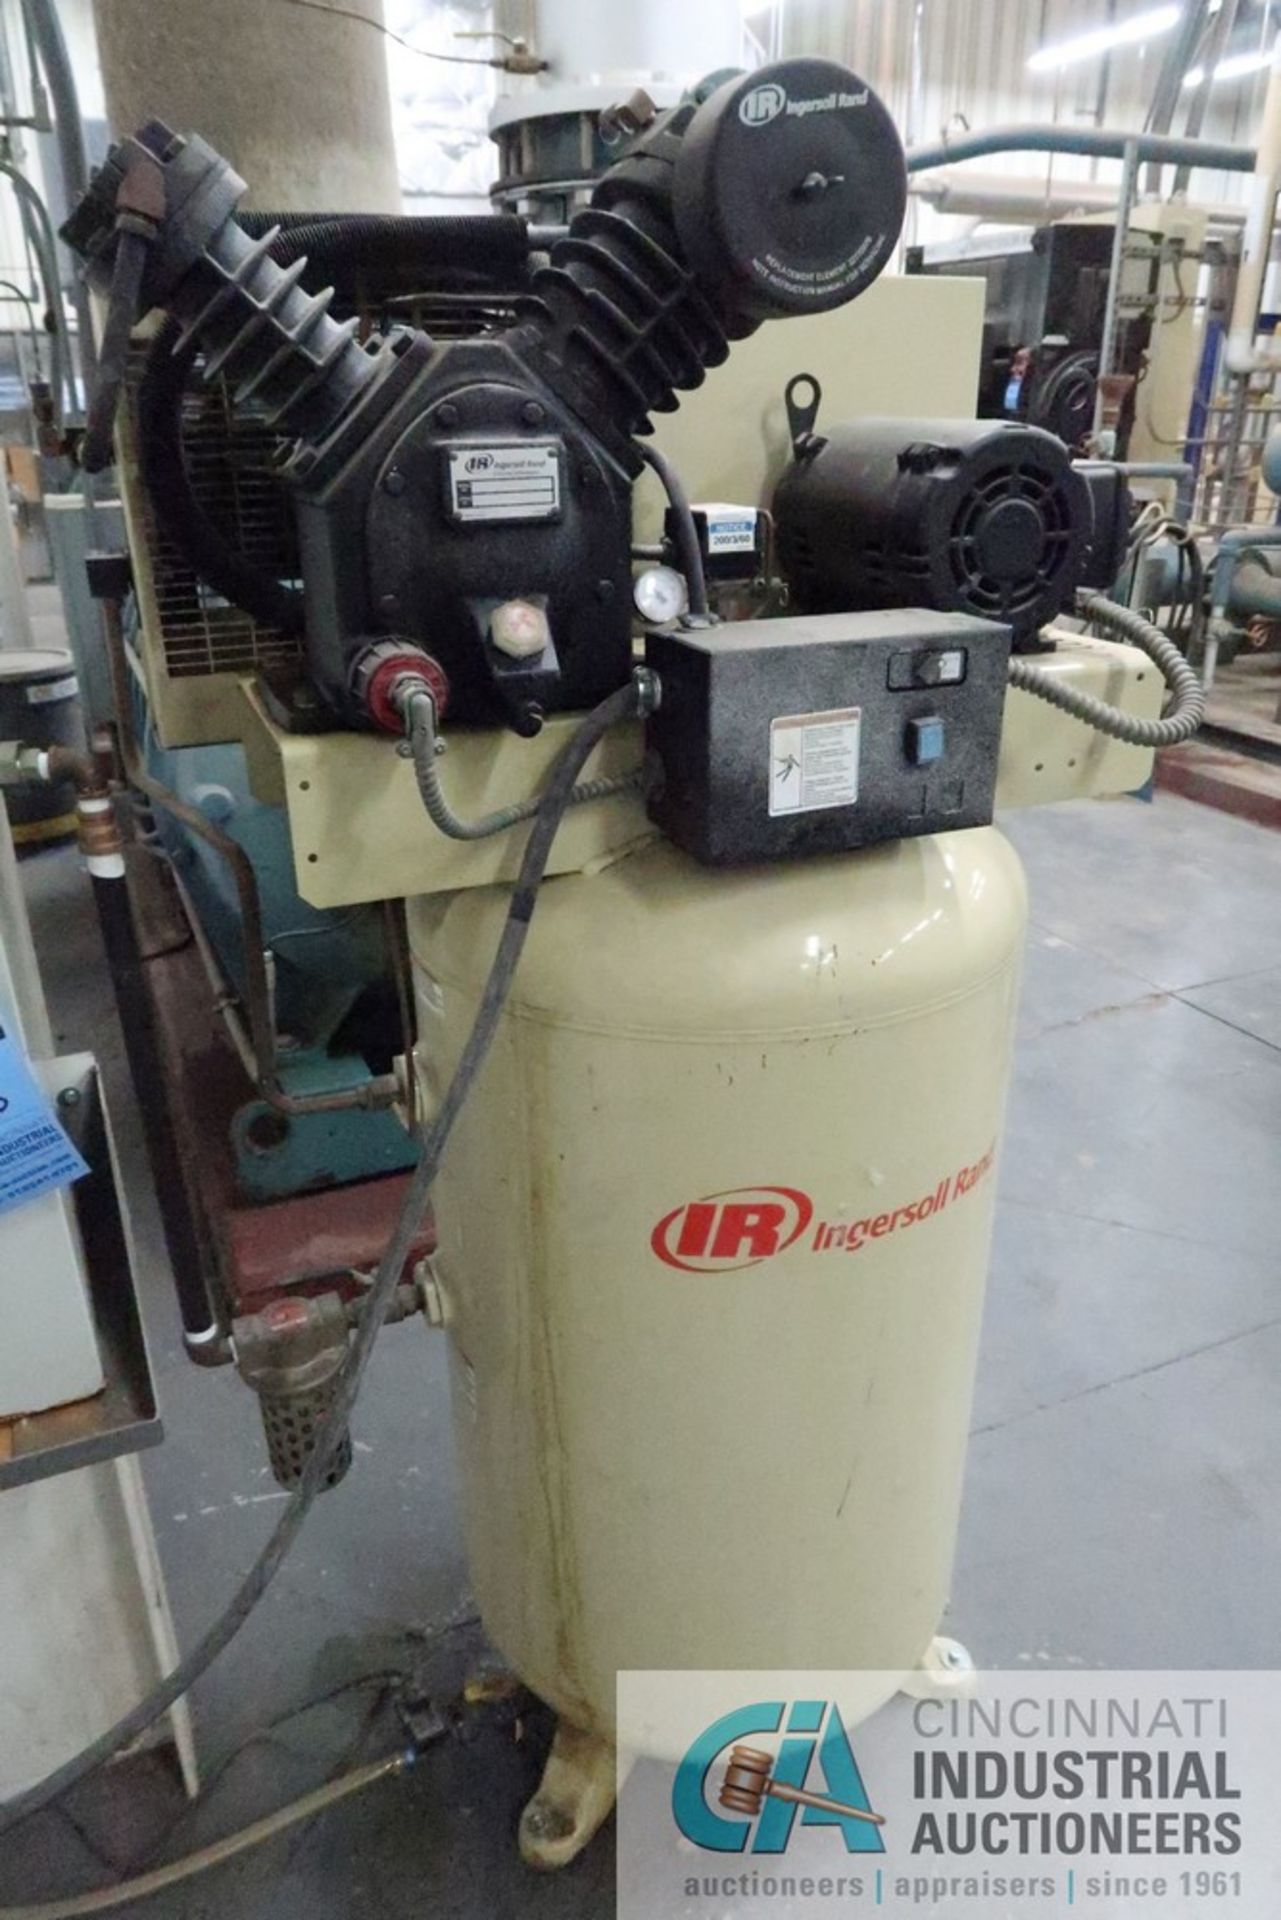 5-HP INGERSOLL RAND 2475 VERTICAL TANK AIR COMPRESSOR W/ DOMINICK AIR DRYER - Image 4 of 8